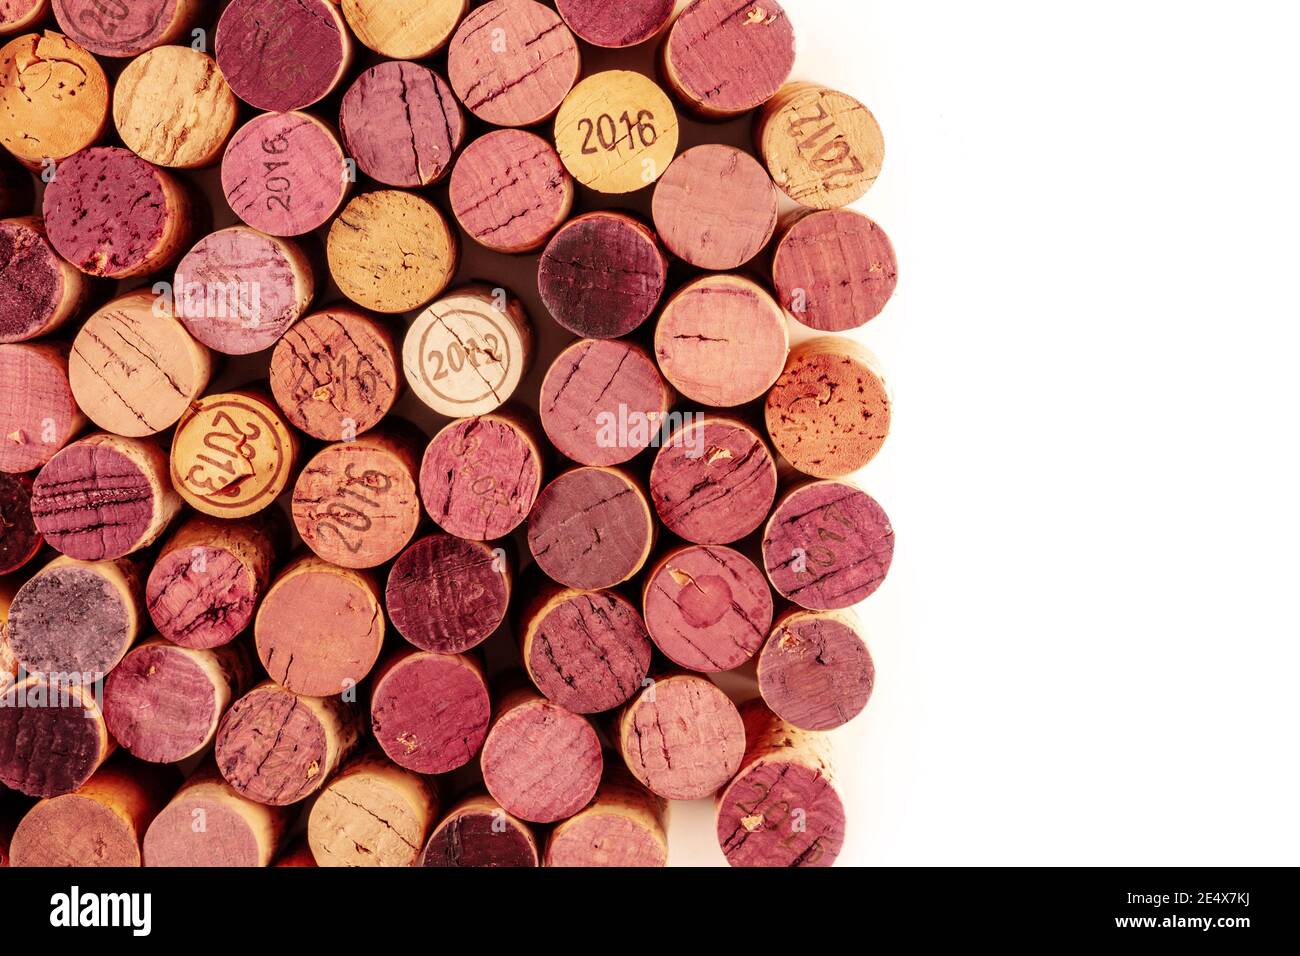 Wine corks, a design template for a restaurant menu, shot from above with copy space, on a white background Stock Photo